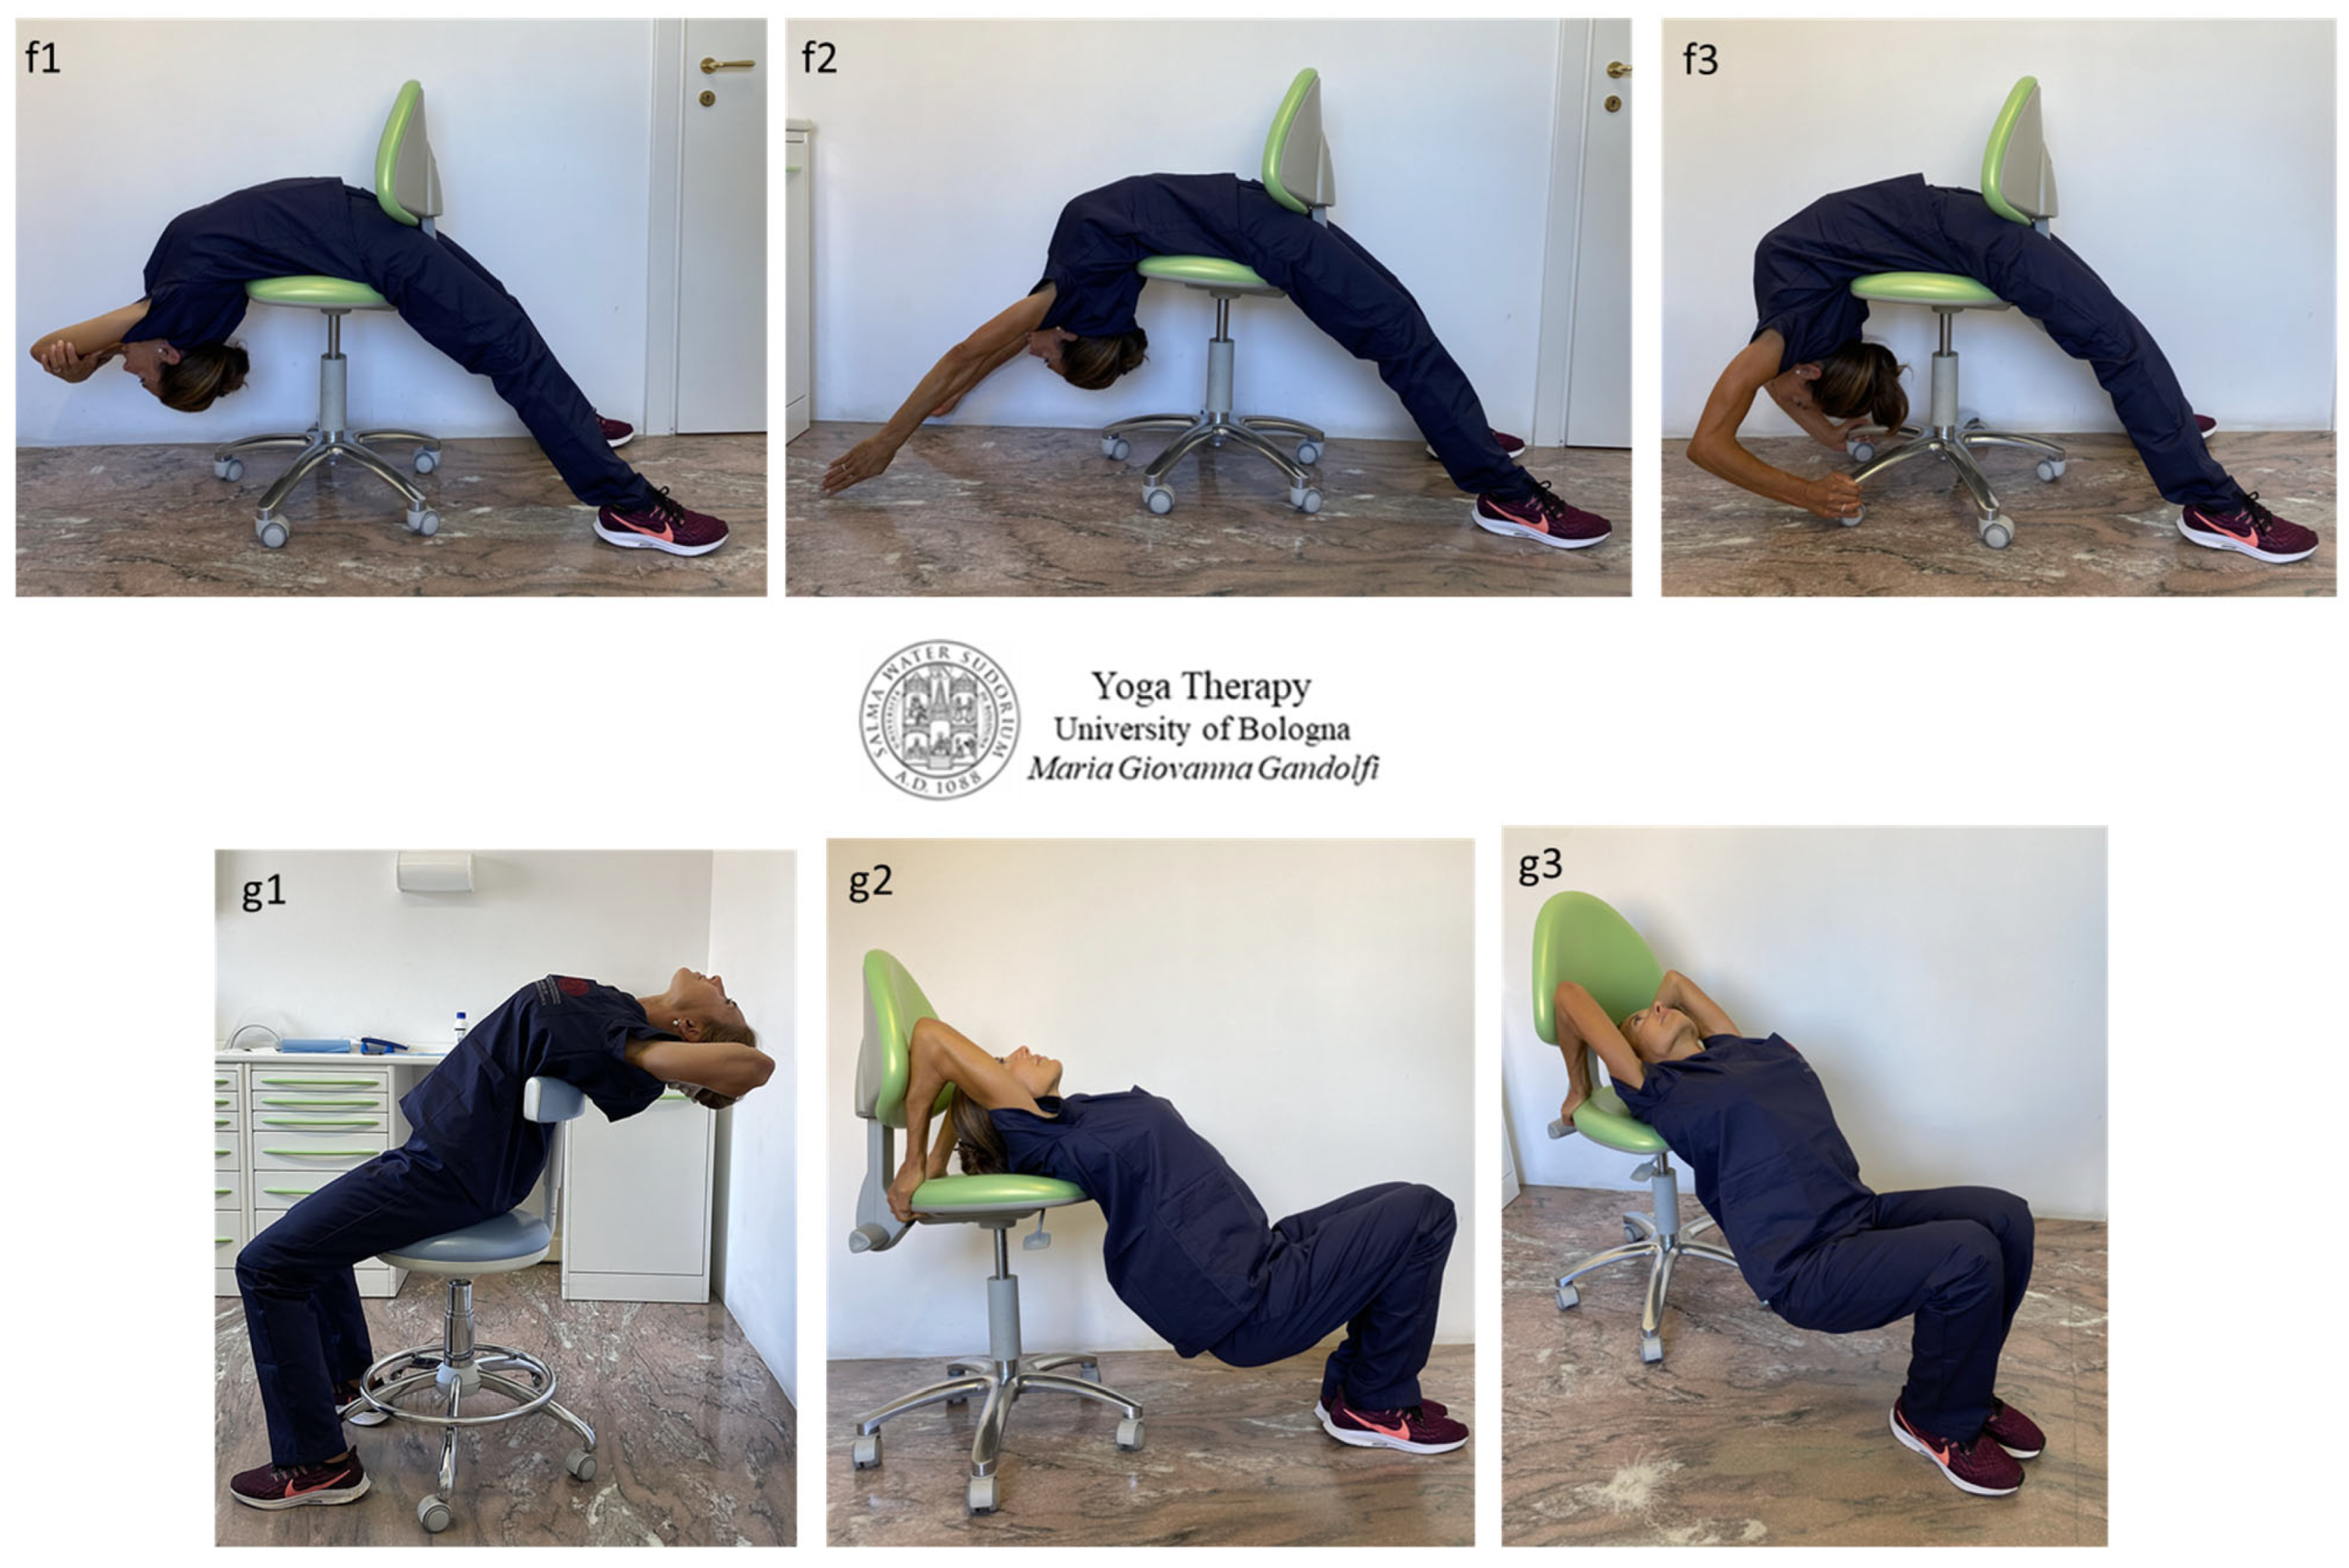 Gluteal Muscle Activation During Common Yoga Poses  Published in  International Journal of Sports Physical Therapy